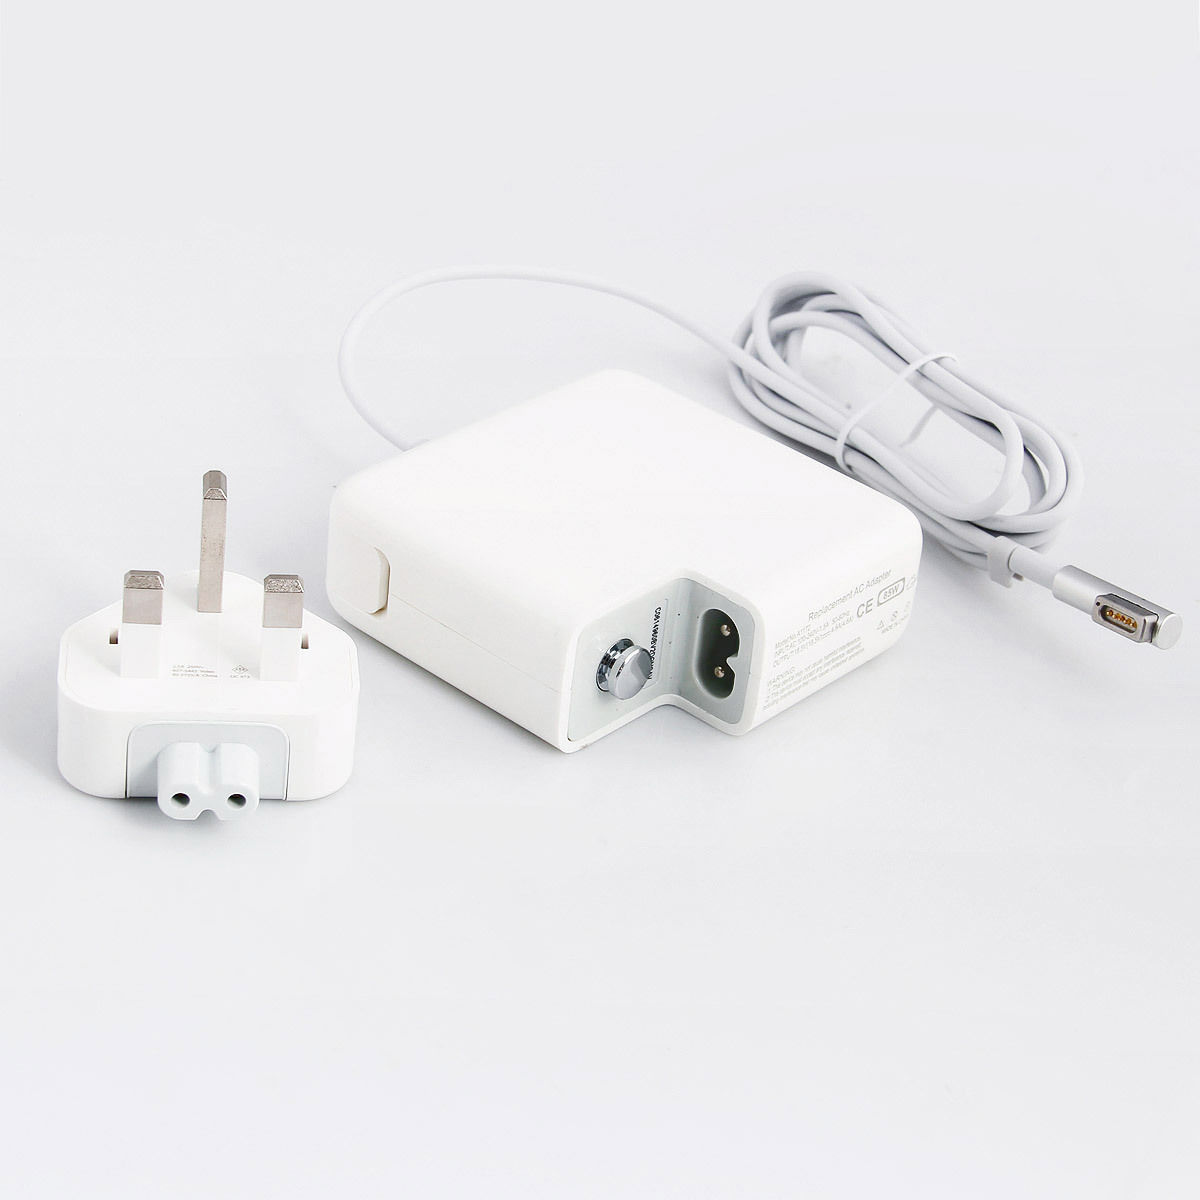 apple macbook pro charger model a1181